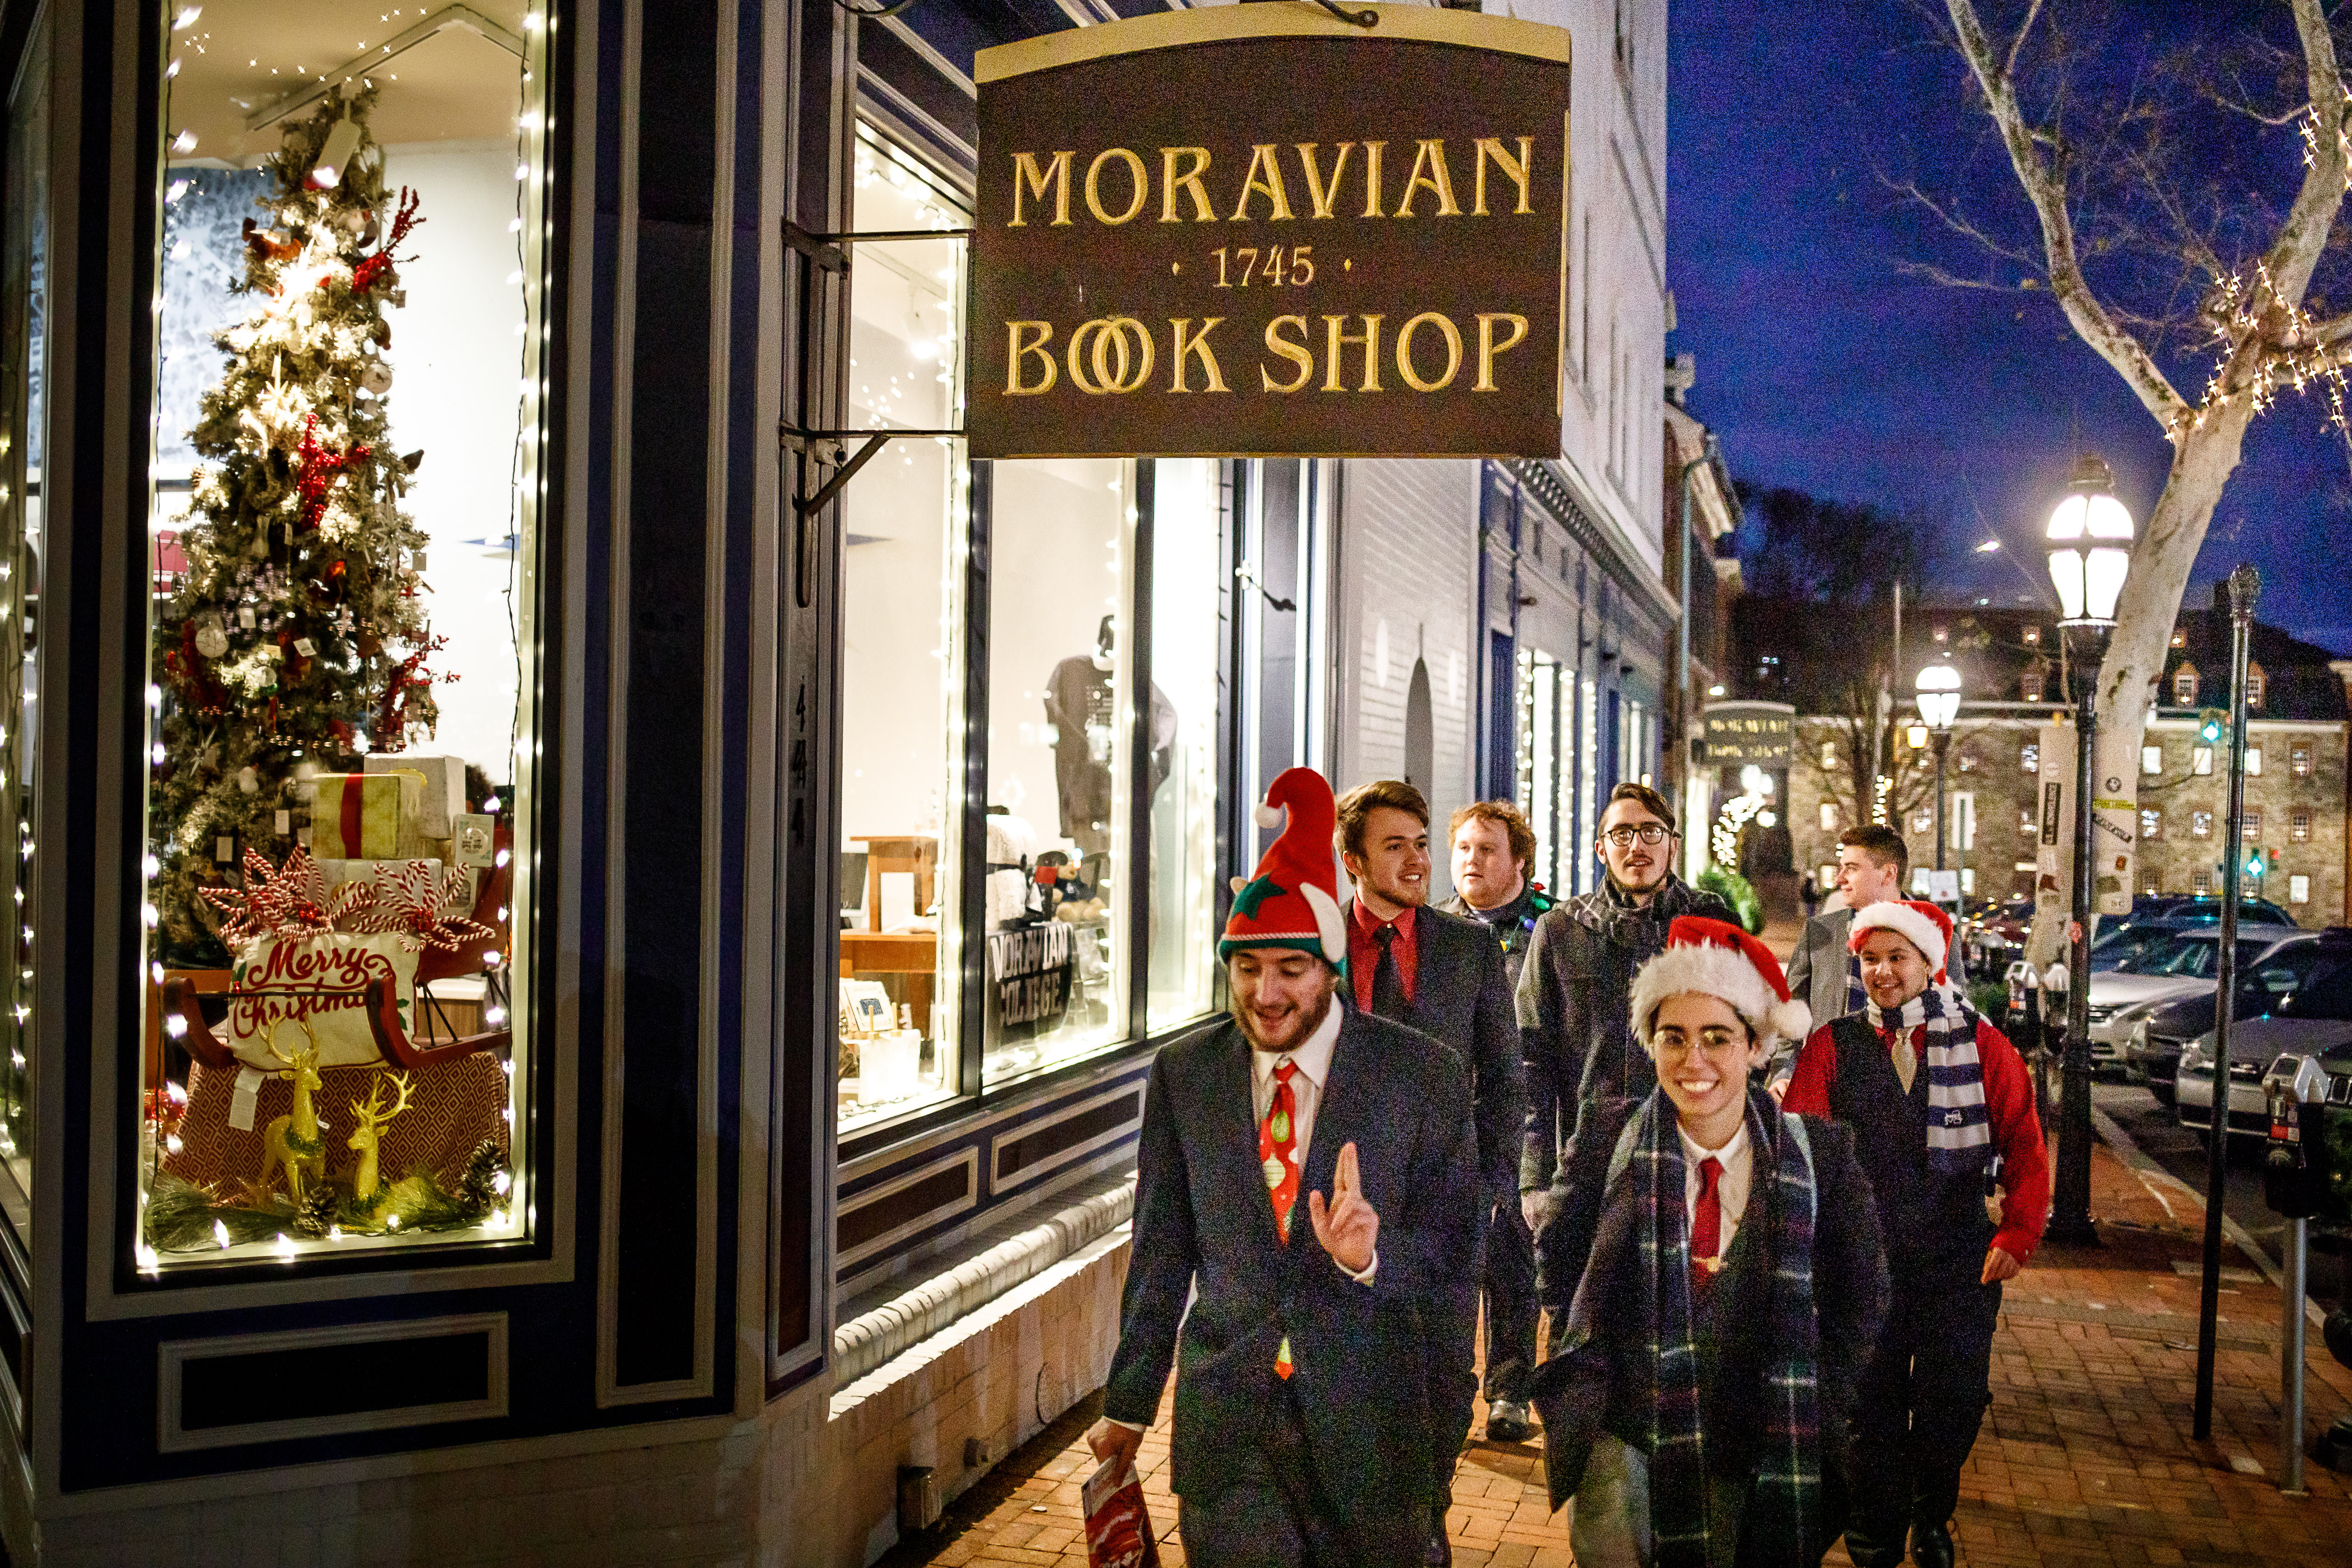 Students walk past the Moravian Book Shop